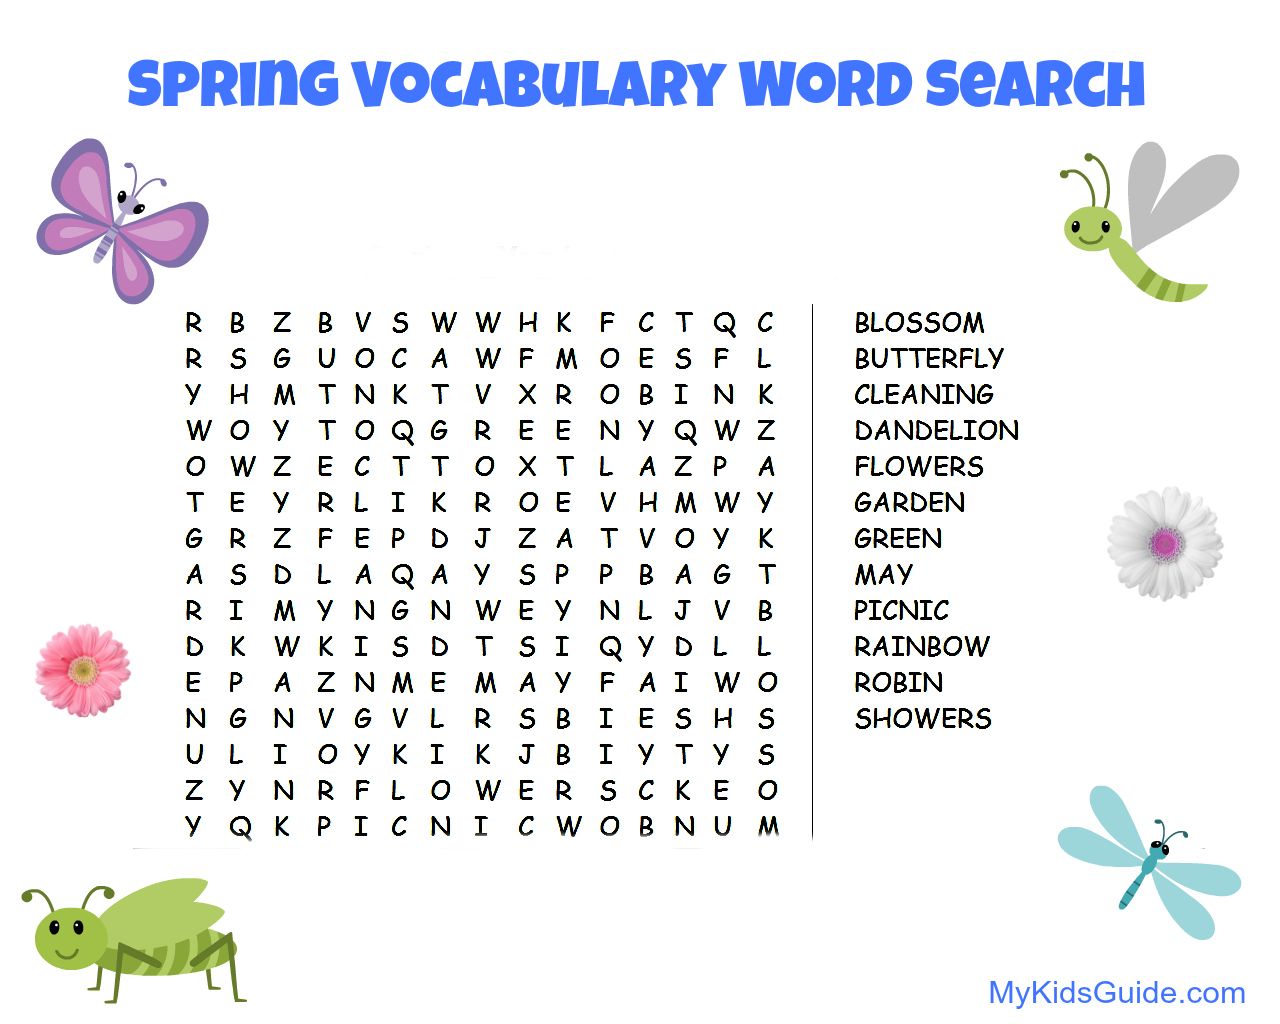 Free Printable Spring Vocabulary Word Search for Kids My Teen Guide